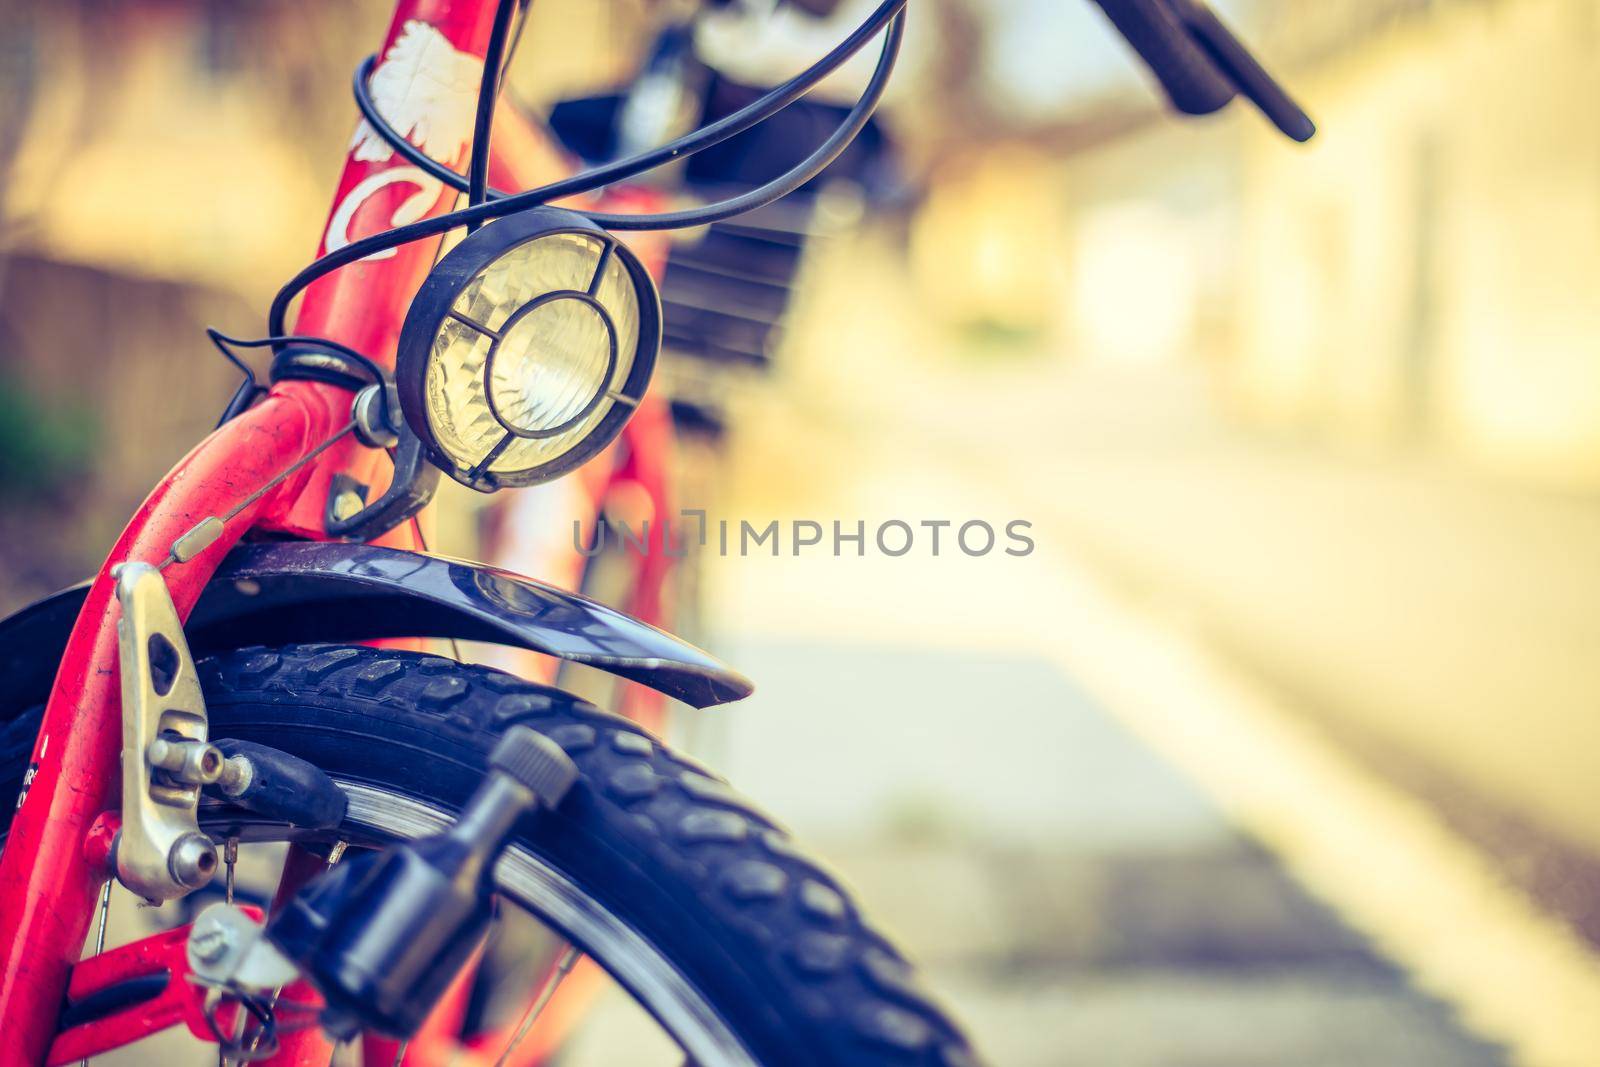 Bike in the city: Front picture of a city bike, blurred background by Daxenbichler